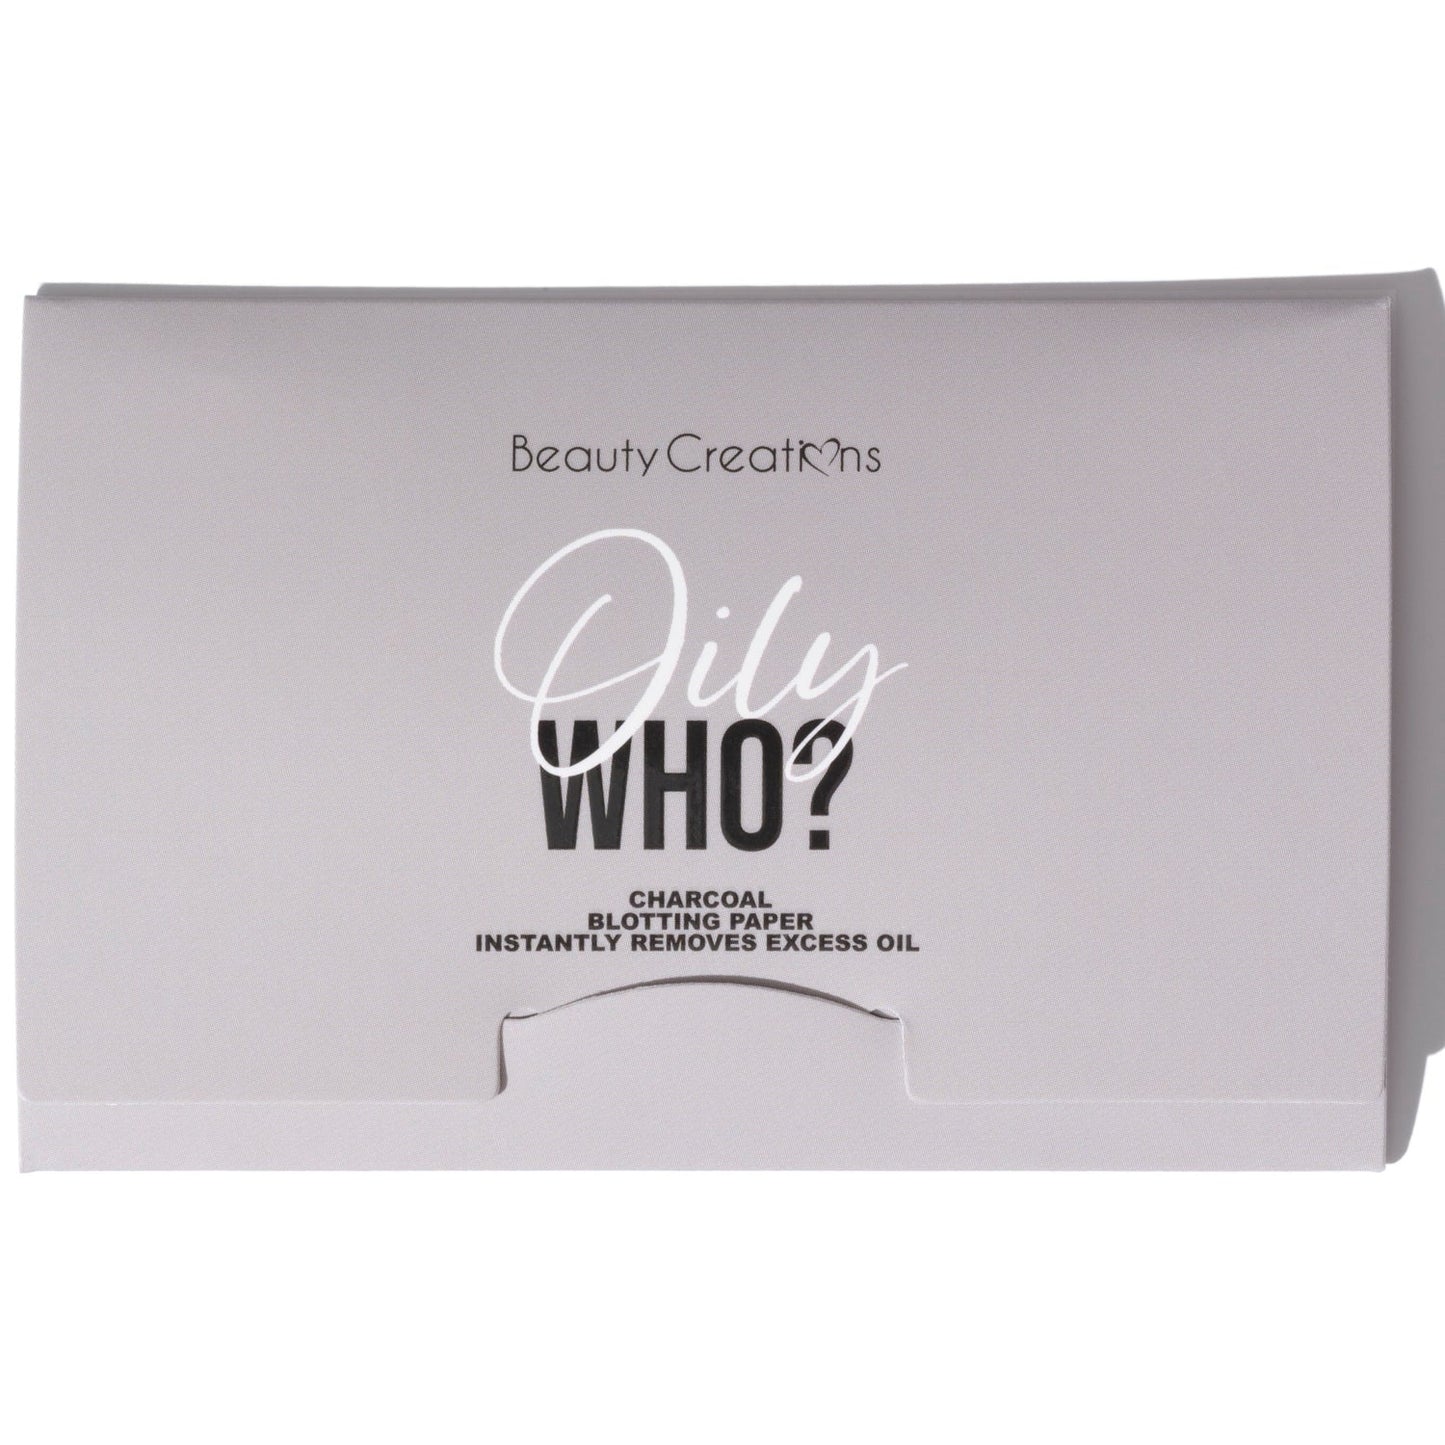 Oily Who? Charcoal Blotting Paper